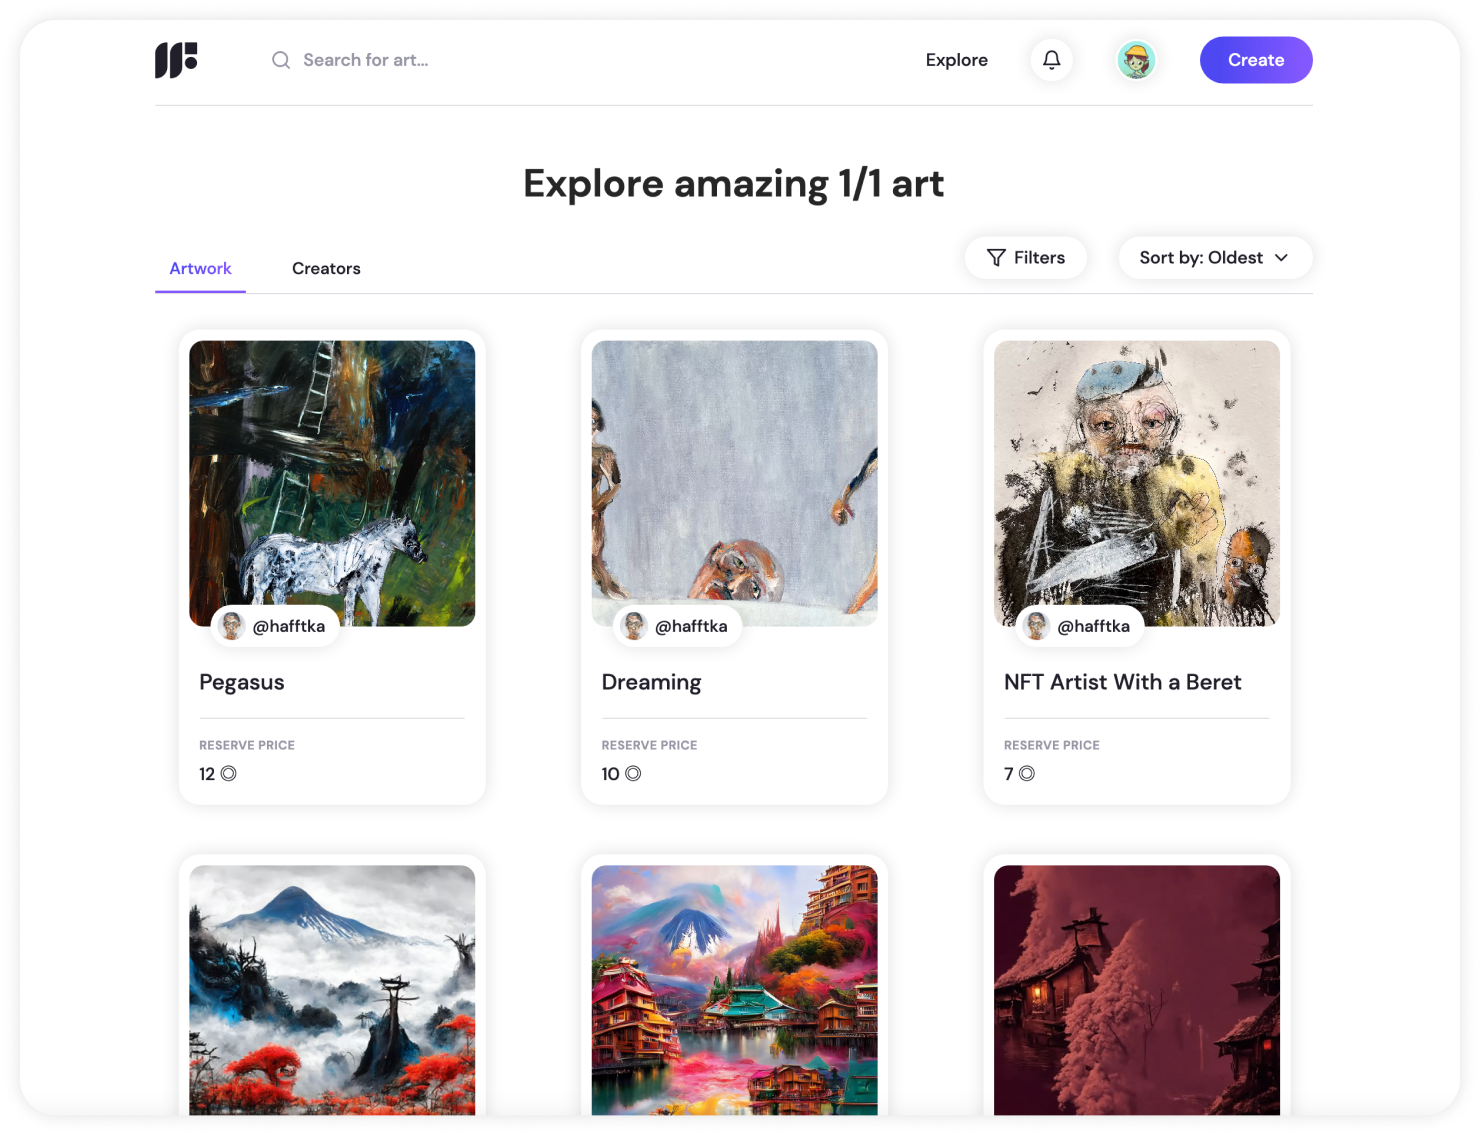 Too many amazing artists to show in one screenshot; the art in the first row here is by Michael Hafftka, the art in the second row is by CH:LL.